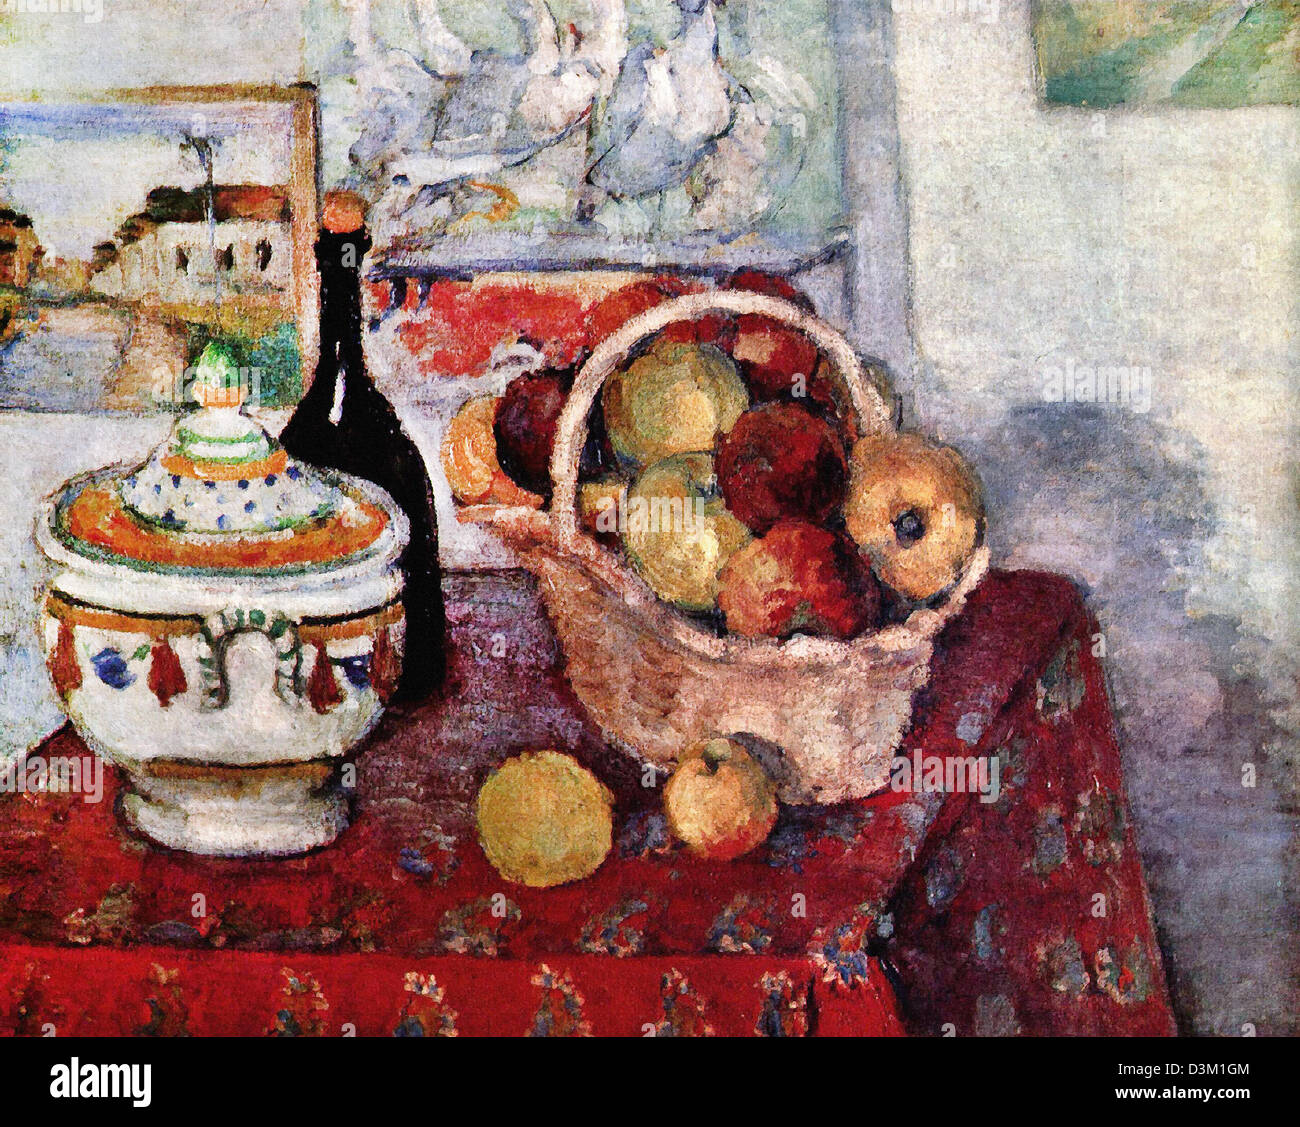 Paul Cezanne, Still Life With Soup Tureen 1877 Oil on canvas. Musée d’Orsay, París Stock Photo